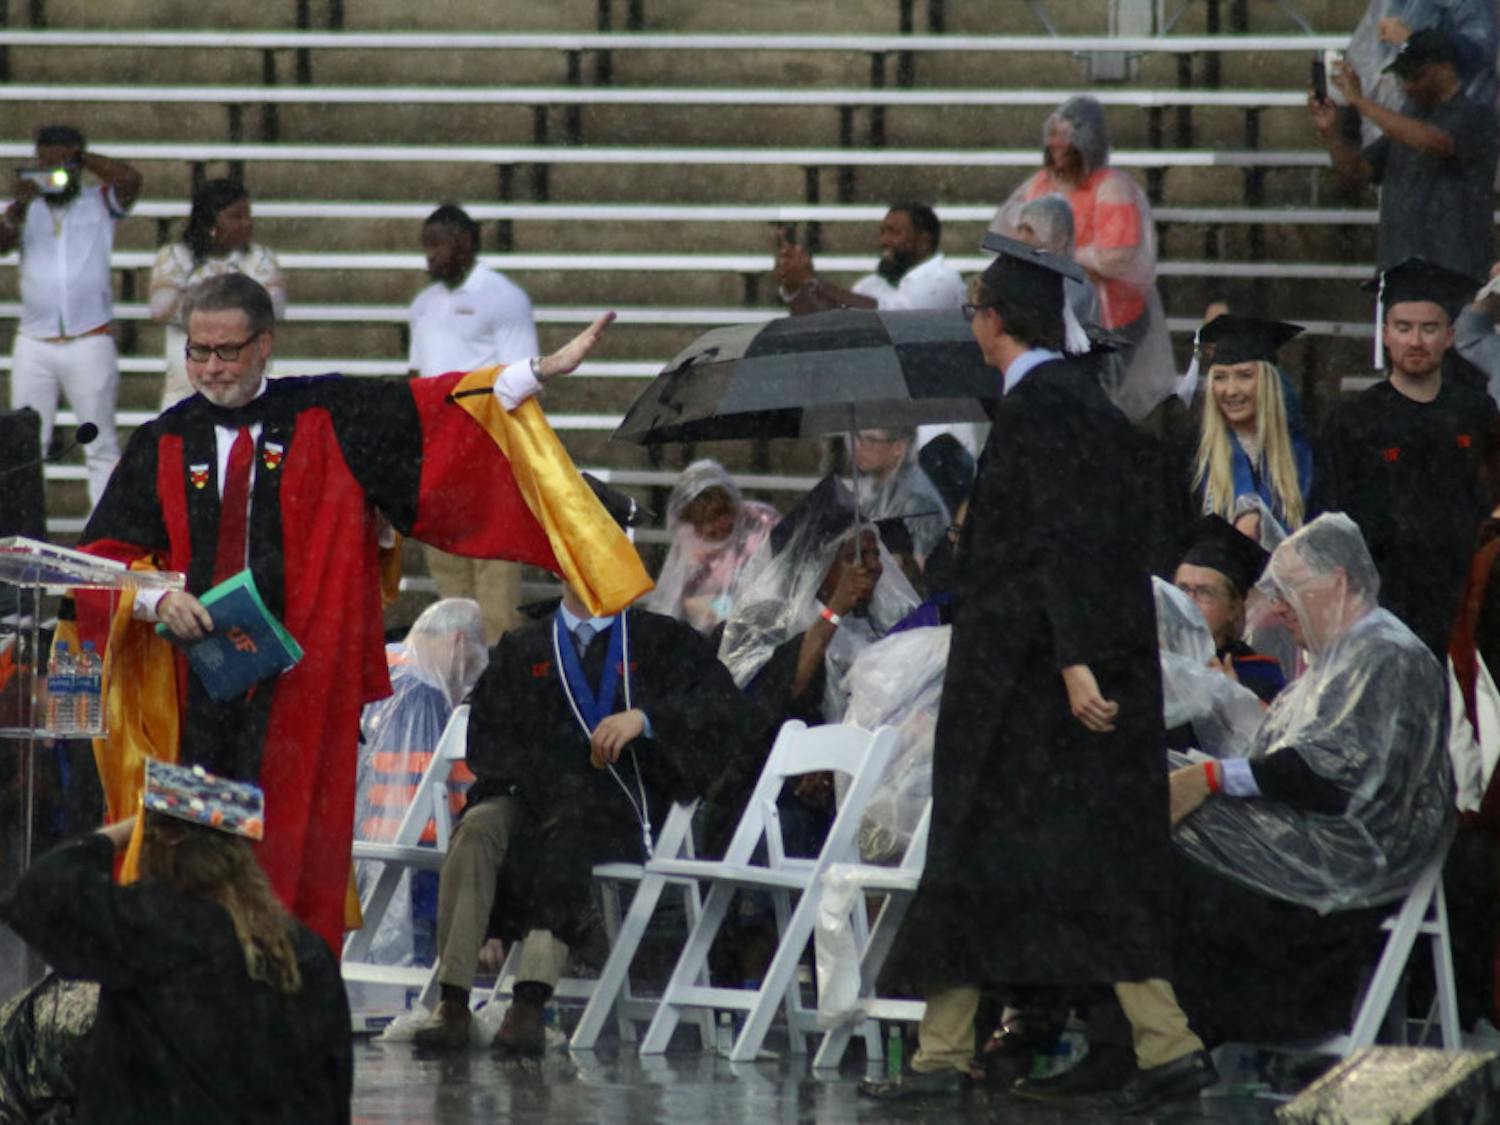 College of Liberal Arts and Sciences Dean, David Richardson, gestures to pause the commencement ceremony. Richardson announced the ceremony would be delayed by 30 minutes, but the ceremony was later moved to an inside
hallway of the stadium.